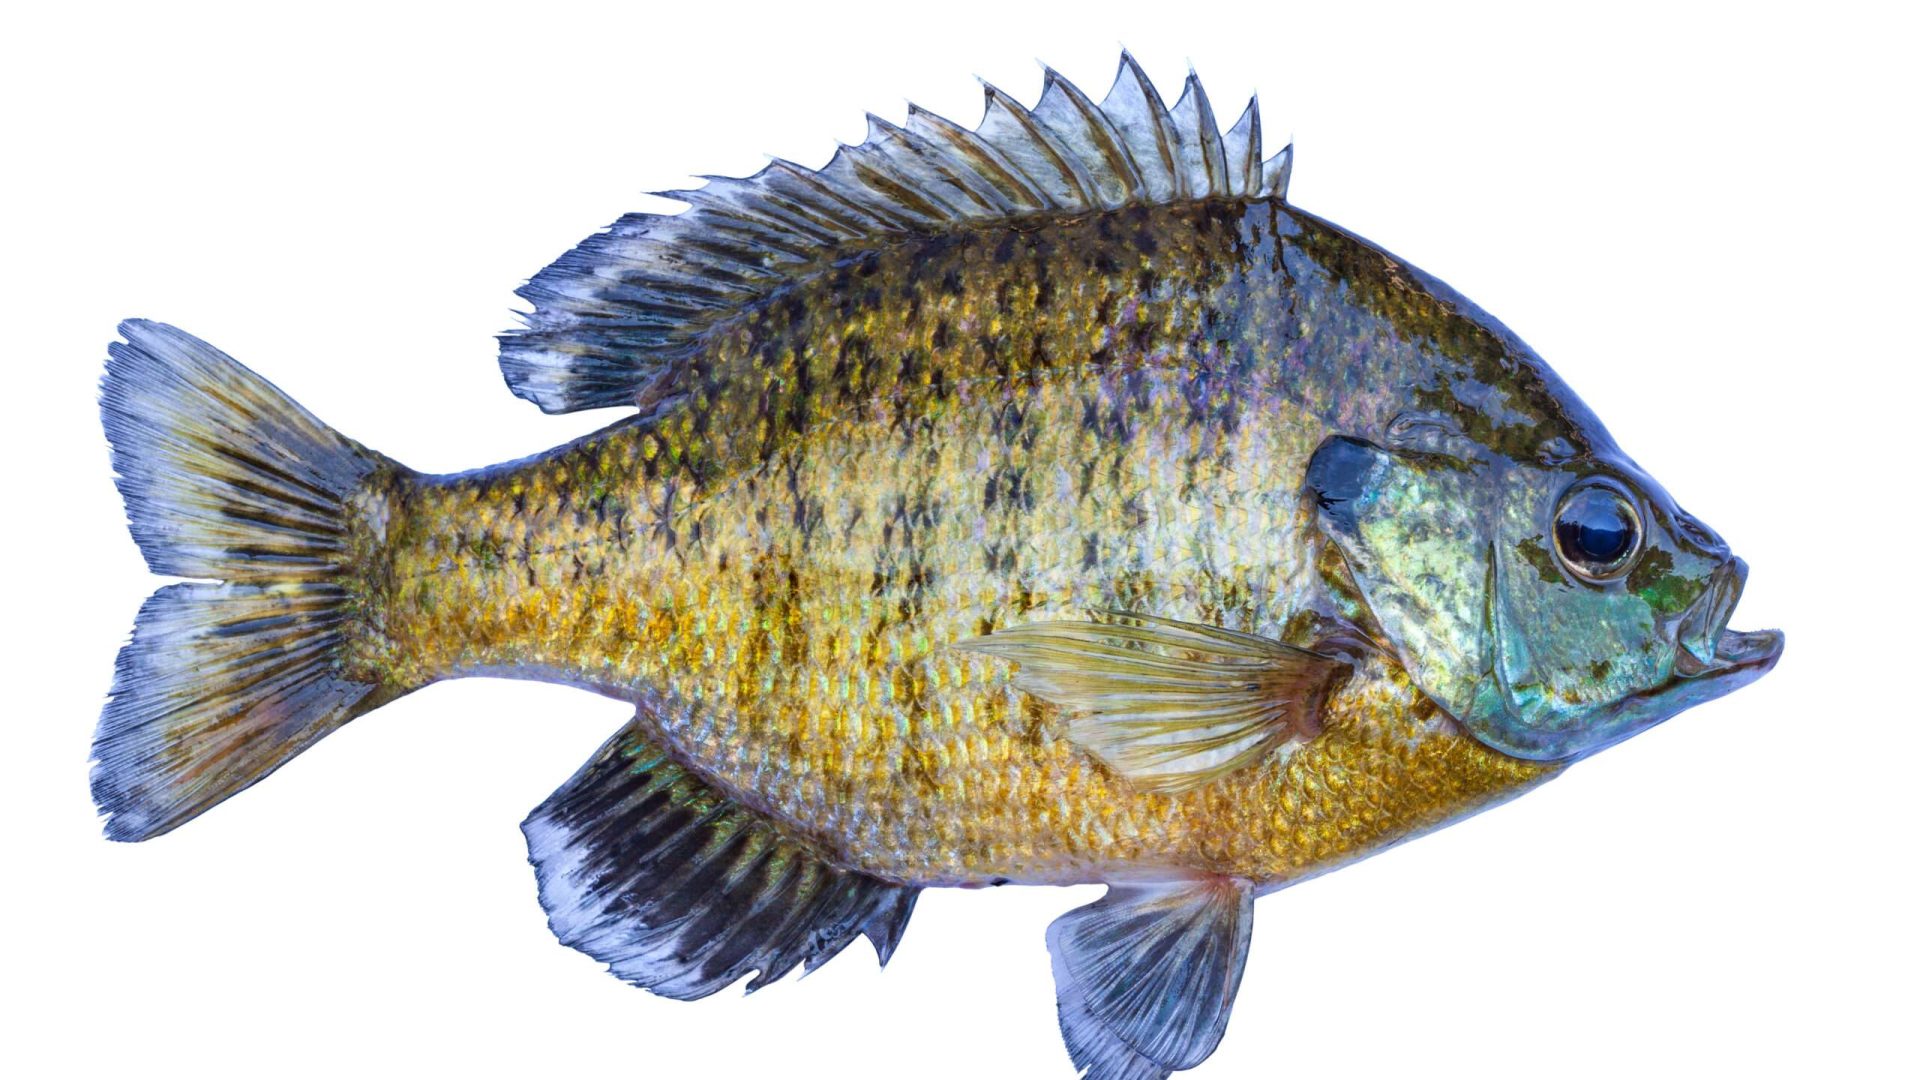 Detailed image of a colorful sunfish